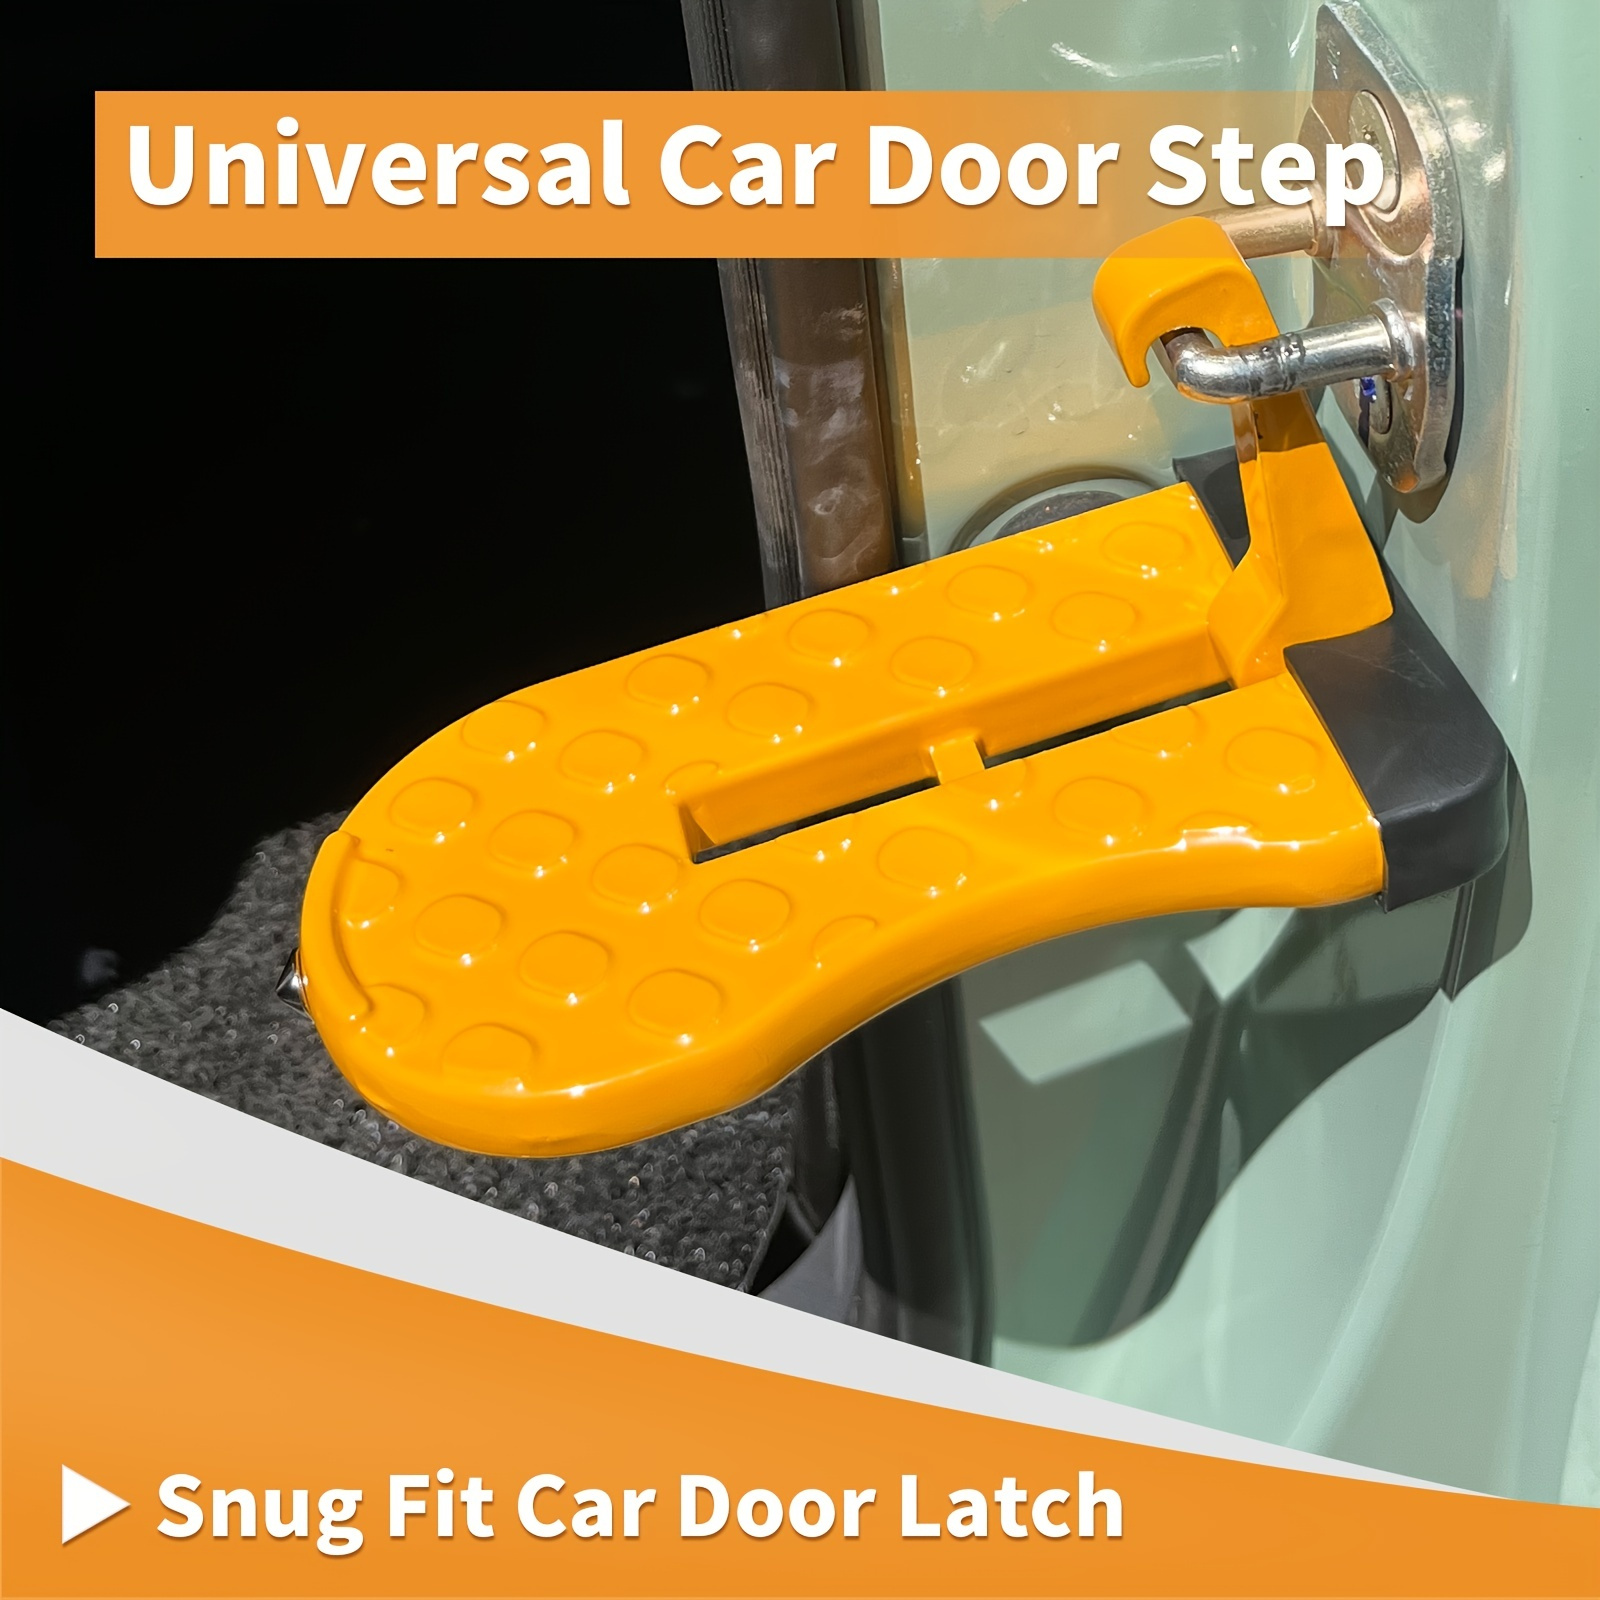 

1pc Car Door Step, Foldable Roof Rack Door Step Up On Door Latch, Easy Roof Access, Universal Car Stand Pedal With Safety Hammer